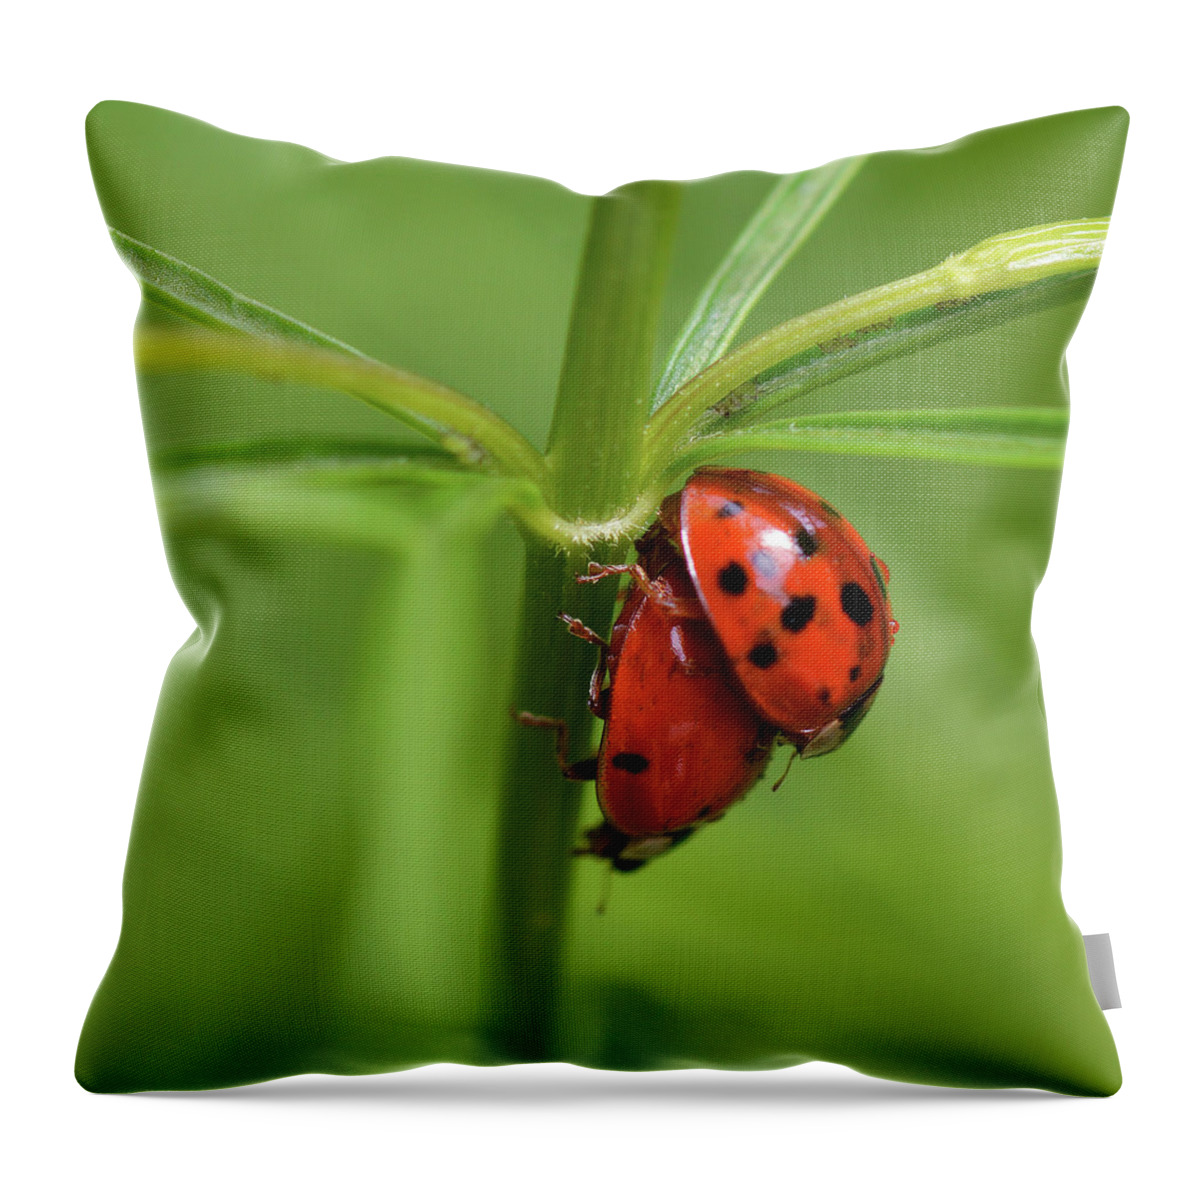  Throw Pillow featuring the photograph Iadybug #3 by Yue Wang